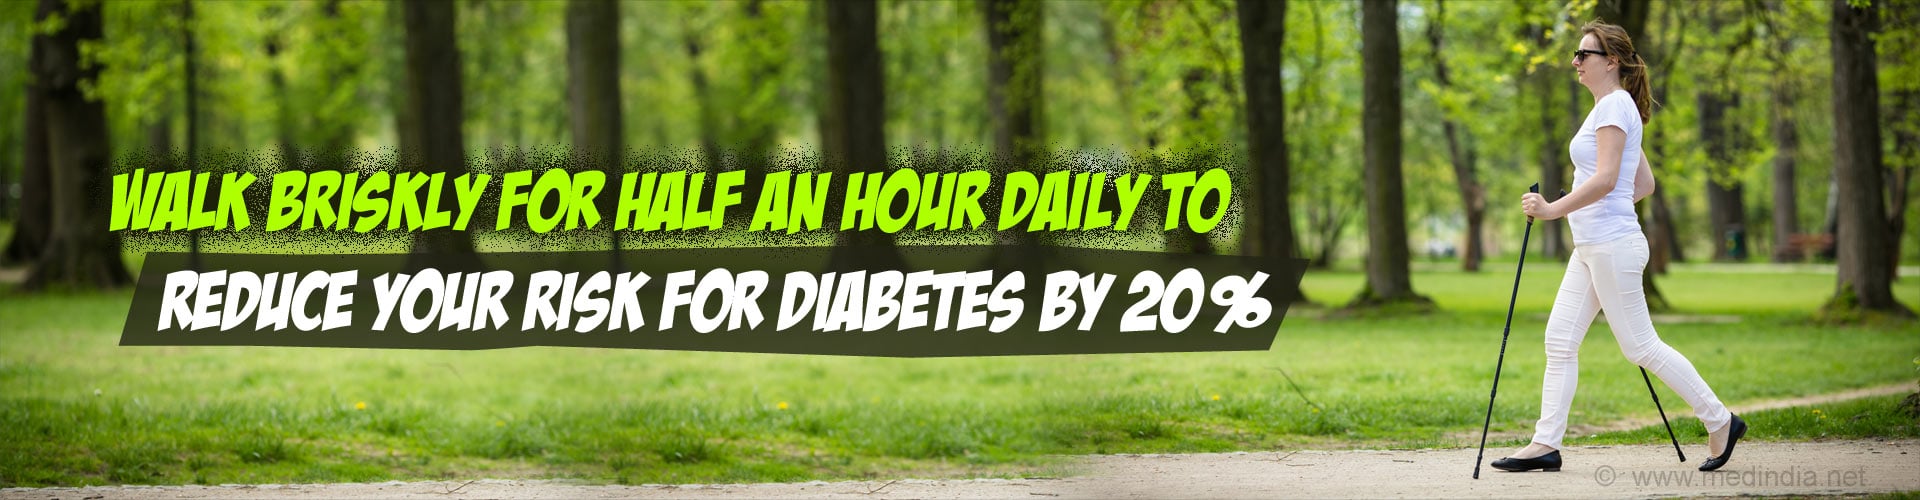 Walk briskly for half an hour daily to reduce your risk for diabetes by 20%.